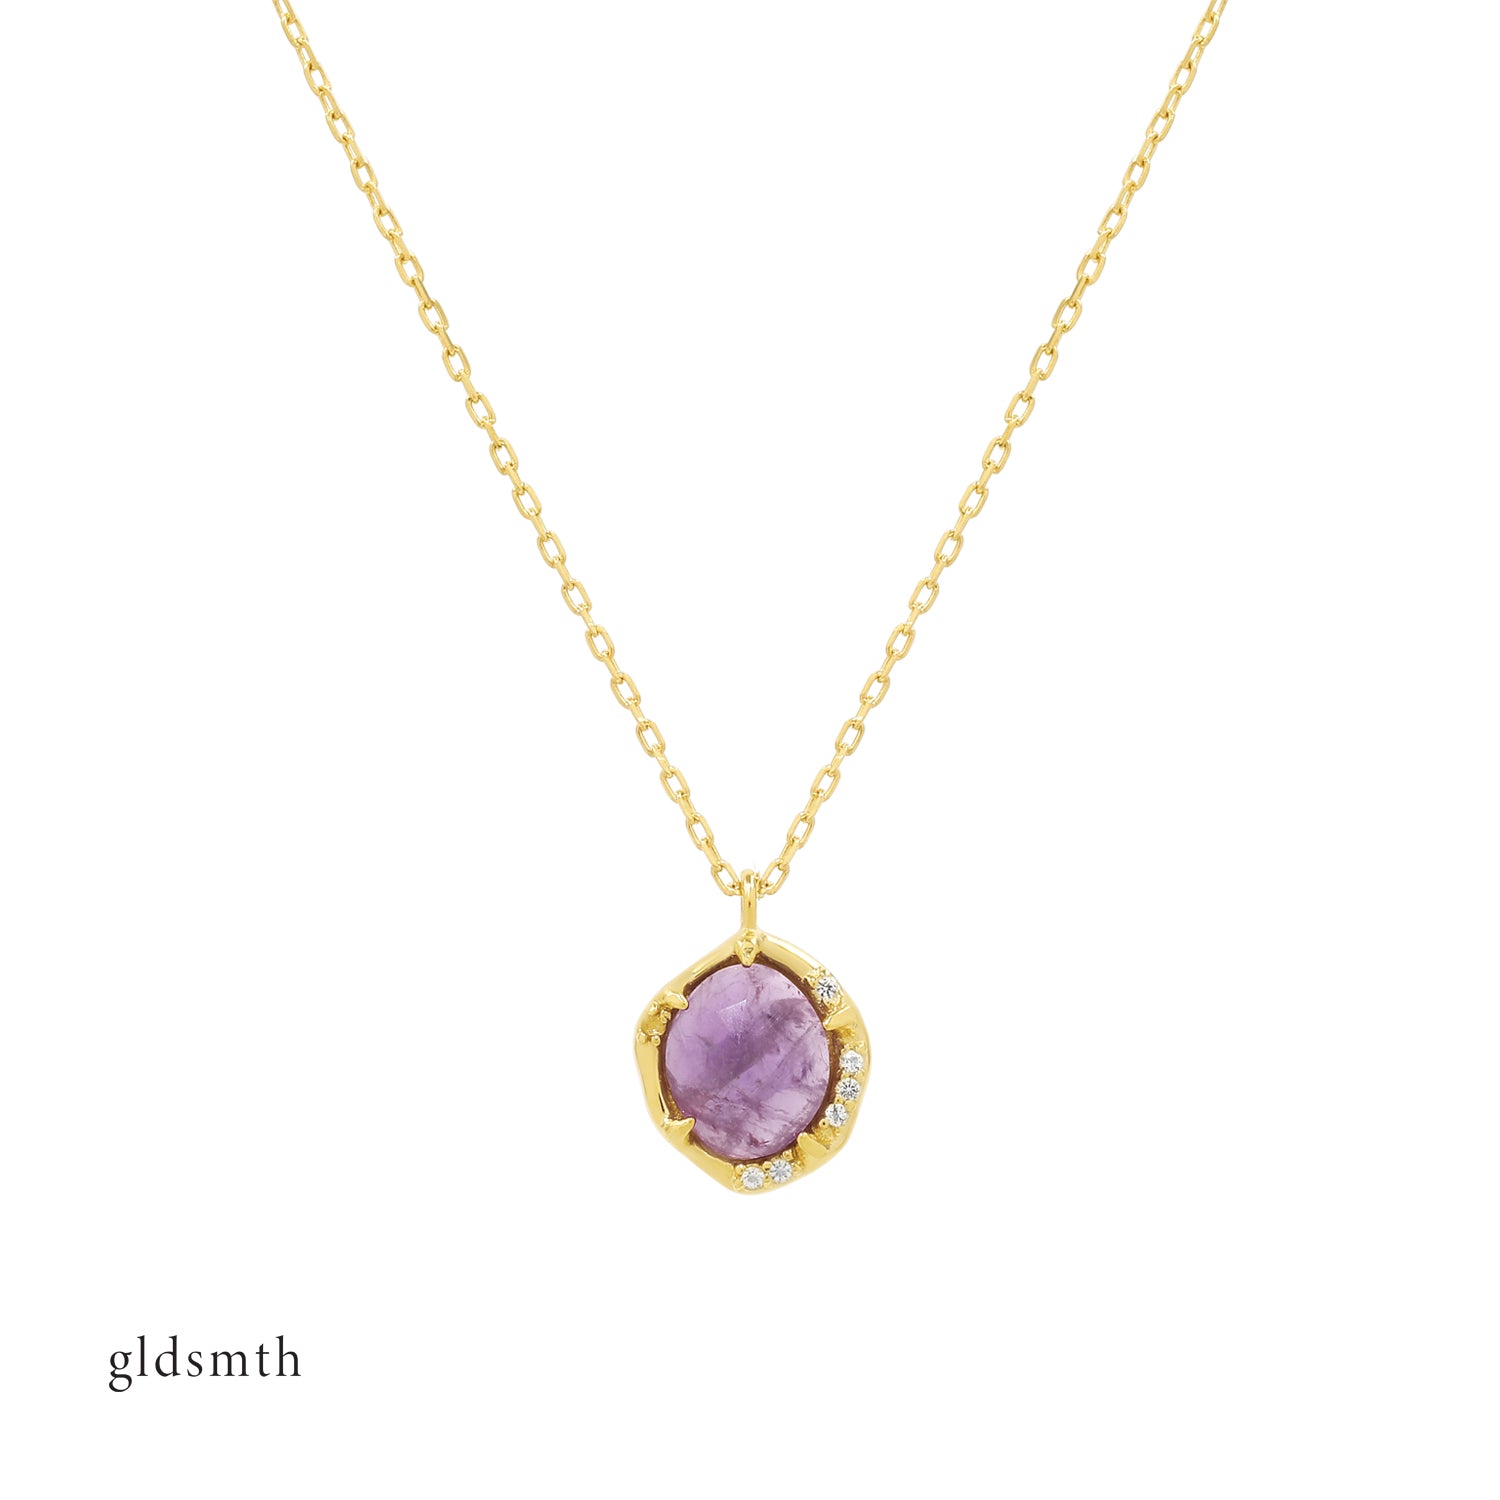 Handcrafted 14K solid yellow gold, set with an Amethyst and white topazes.